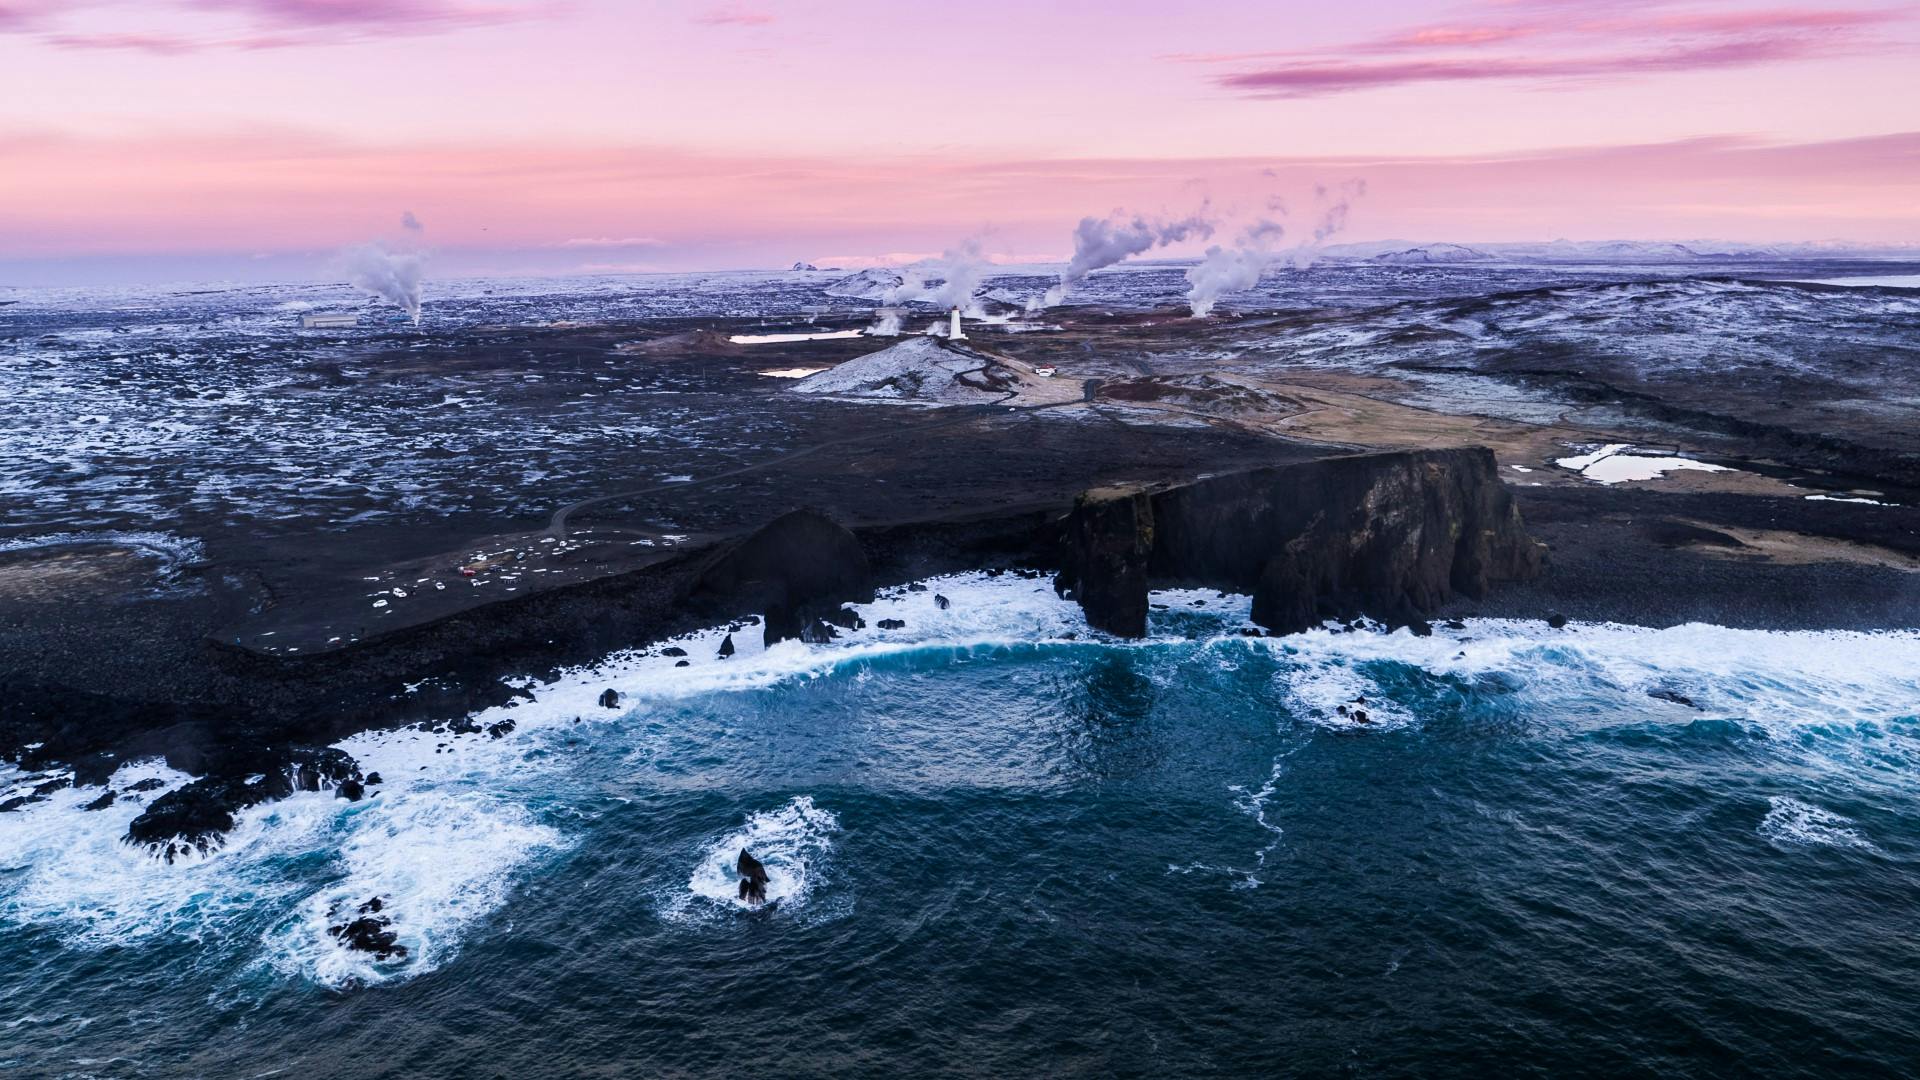 An aerial view of a rugged coastline with steam rising from a power plant nearby